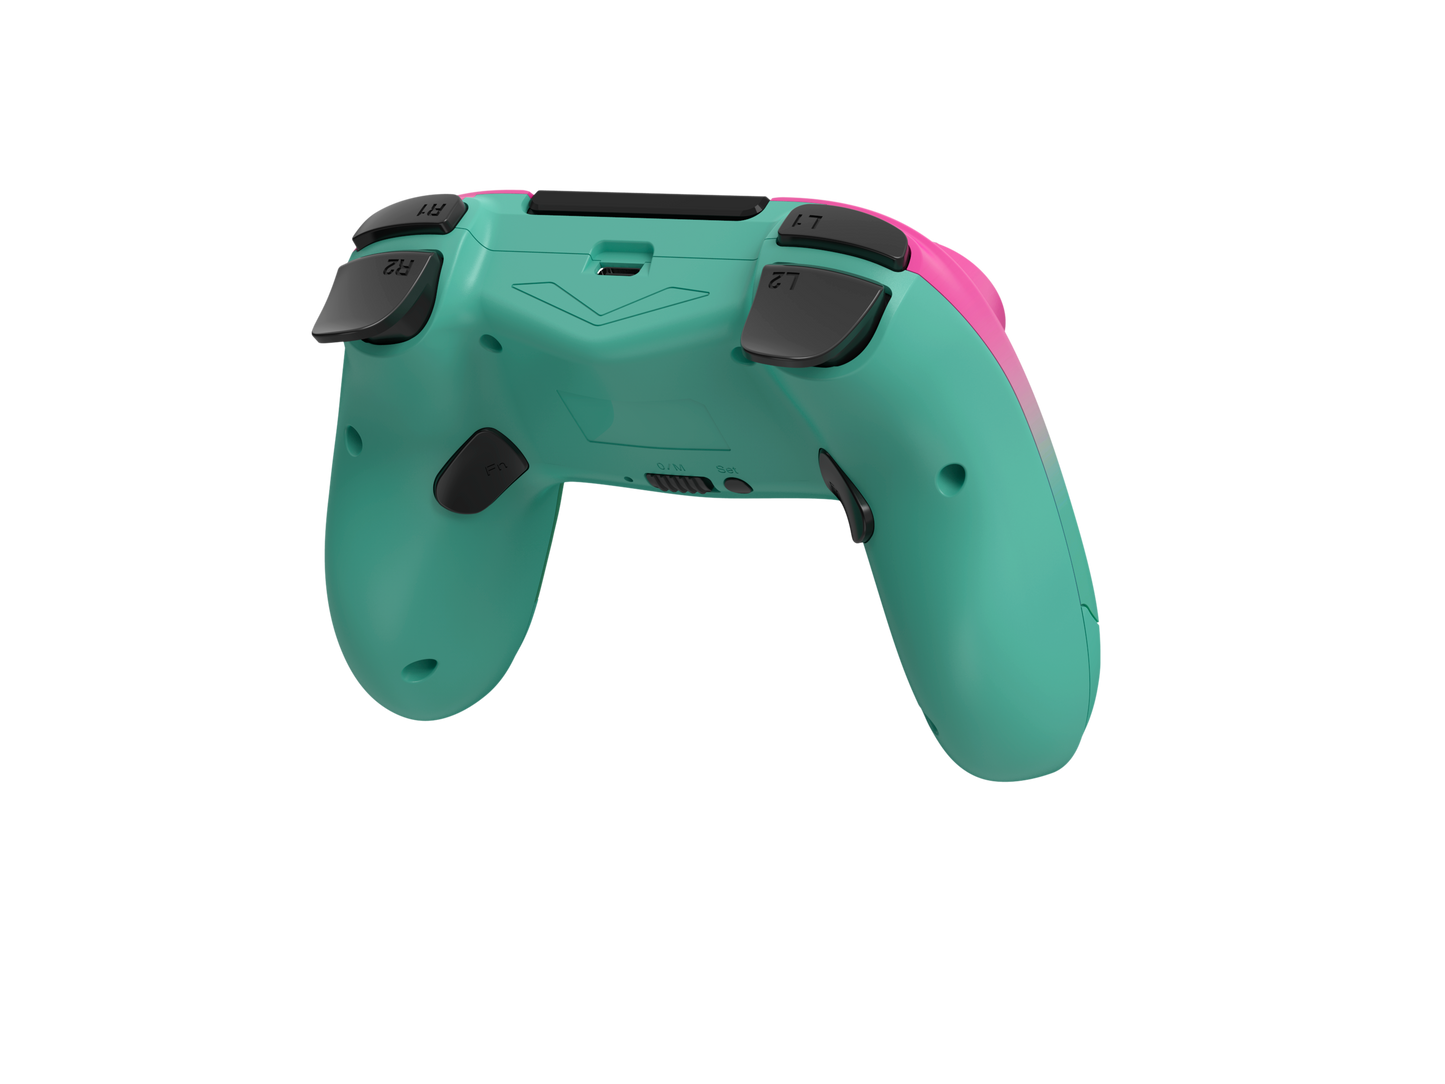 VX4+ Wireless Controller For PS4 PC Pink and Teal